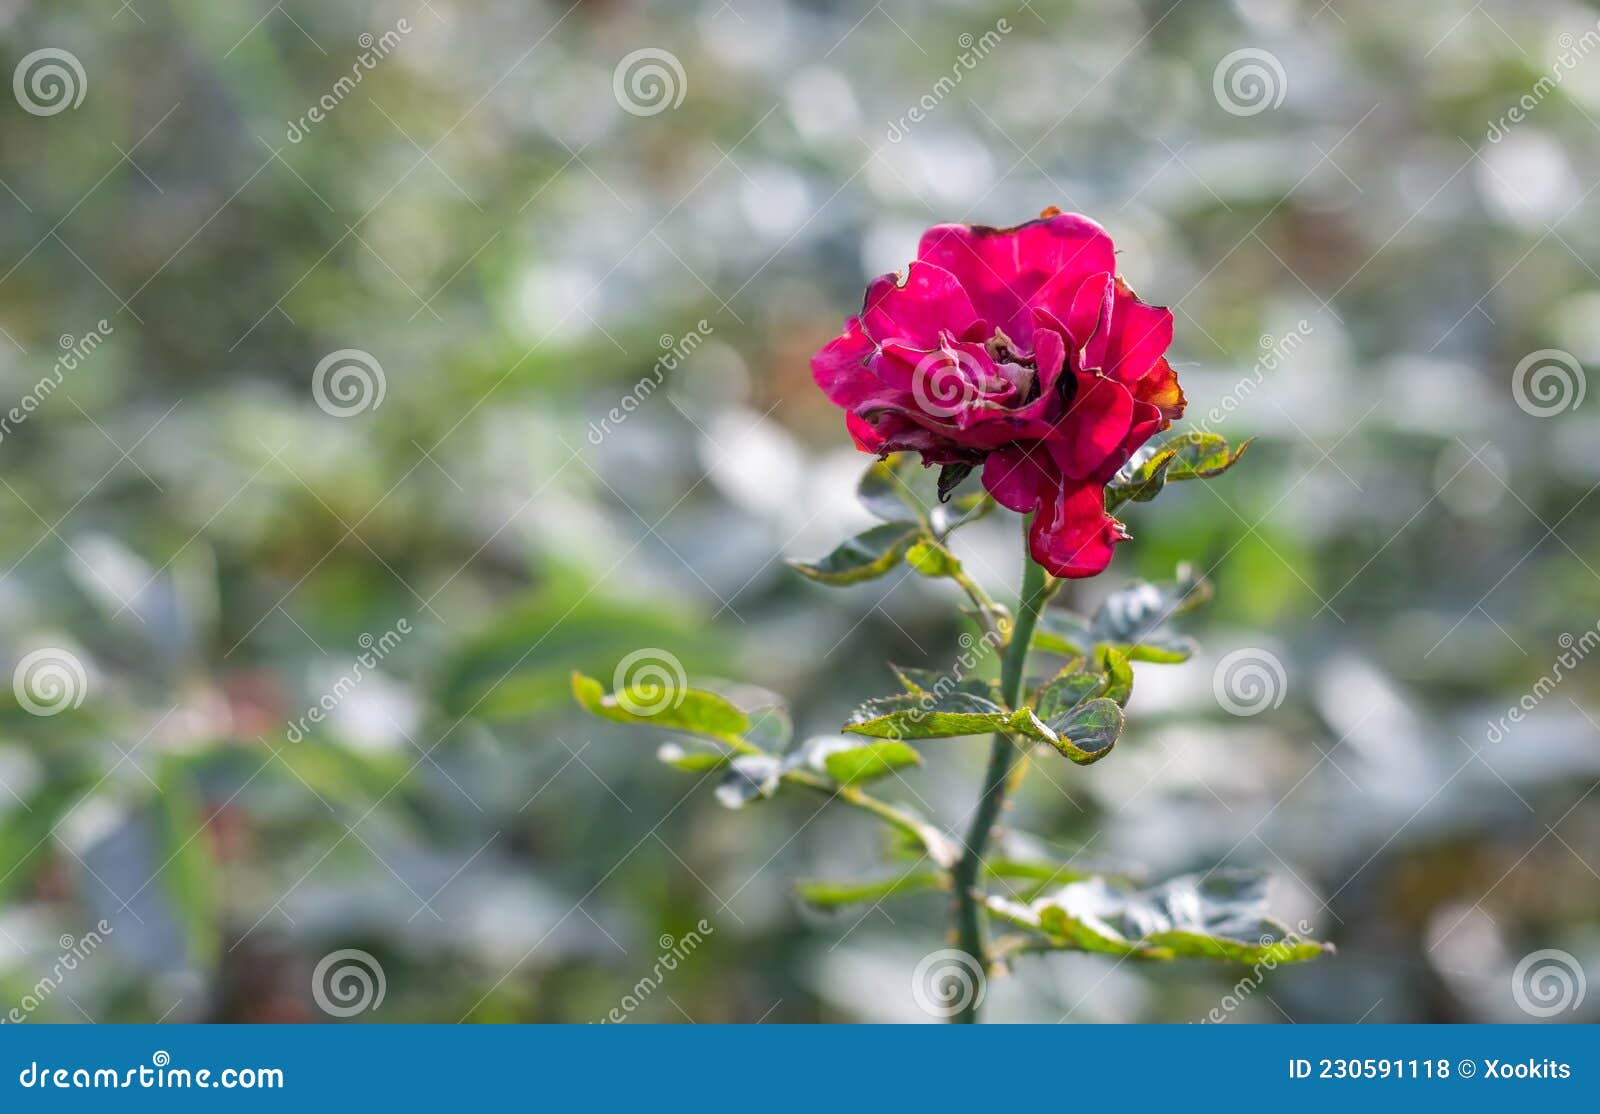 Fully Bloomed Red Rose With Fallen Petals In The Garden With Copy Space